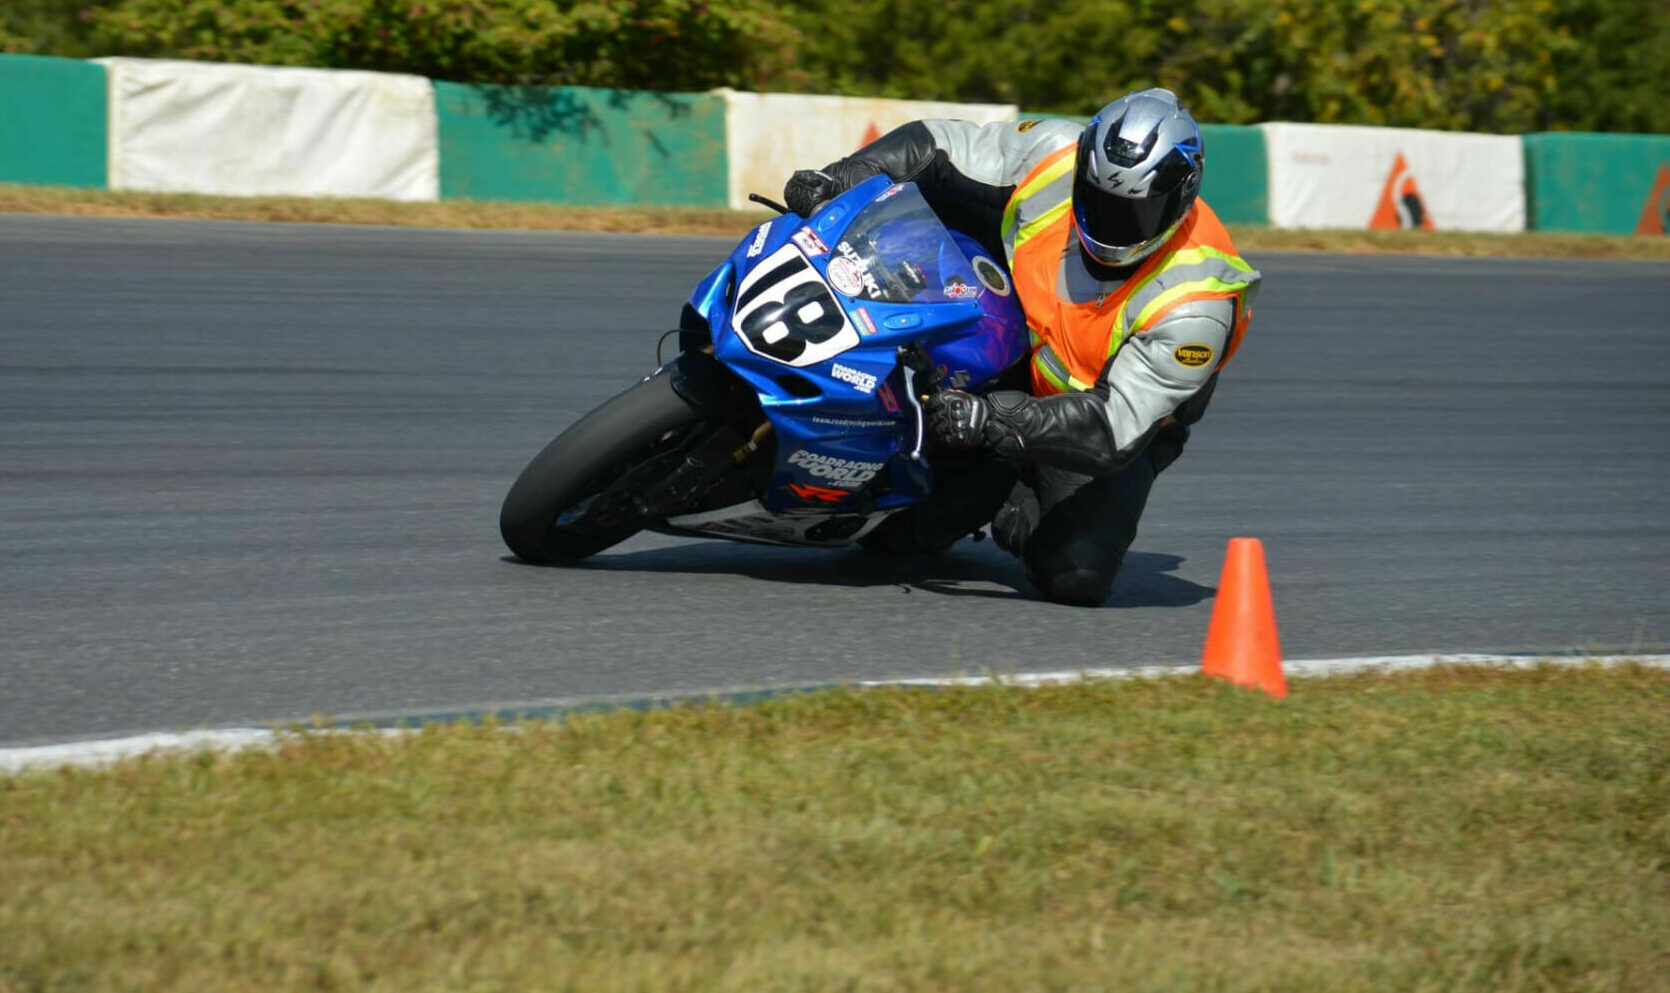 Steve Broadstreet serving as an instructor on his ex-Chris Ulrich Suzuki GSX-R1000 in 2015. Photo courtesy Broadstreet family.